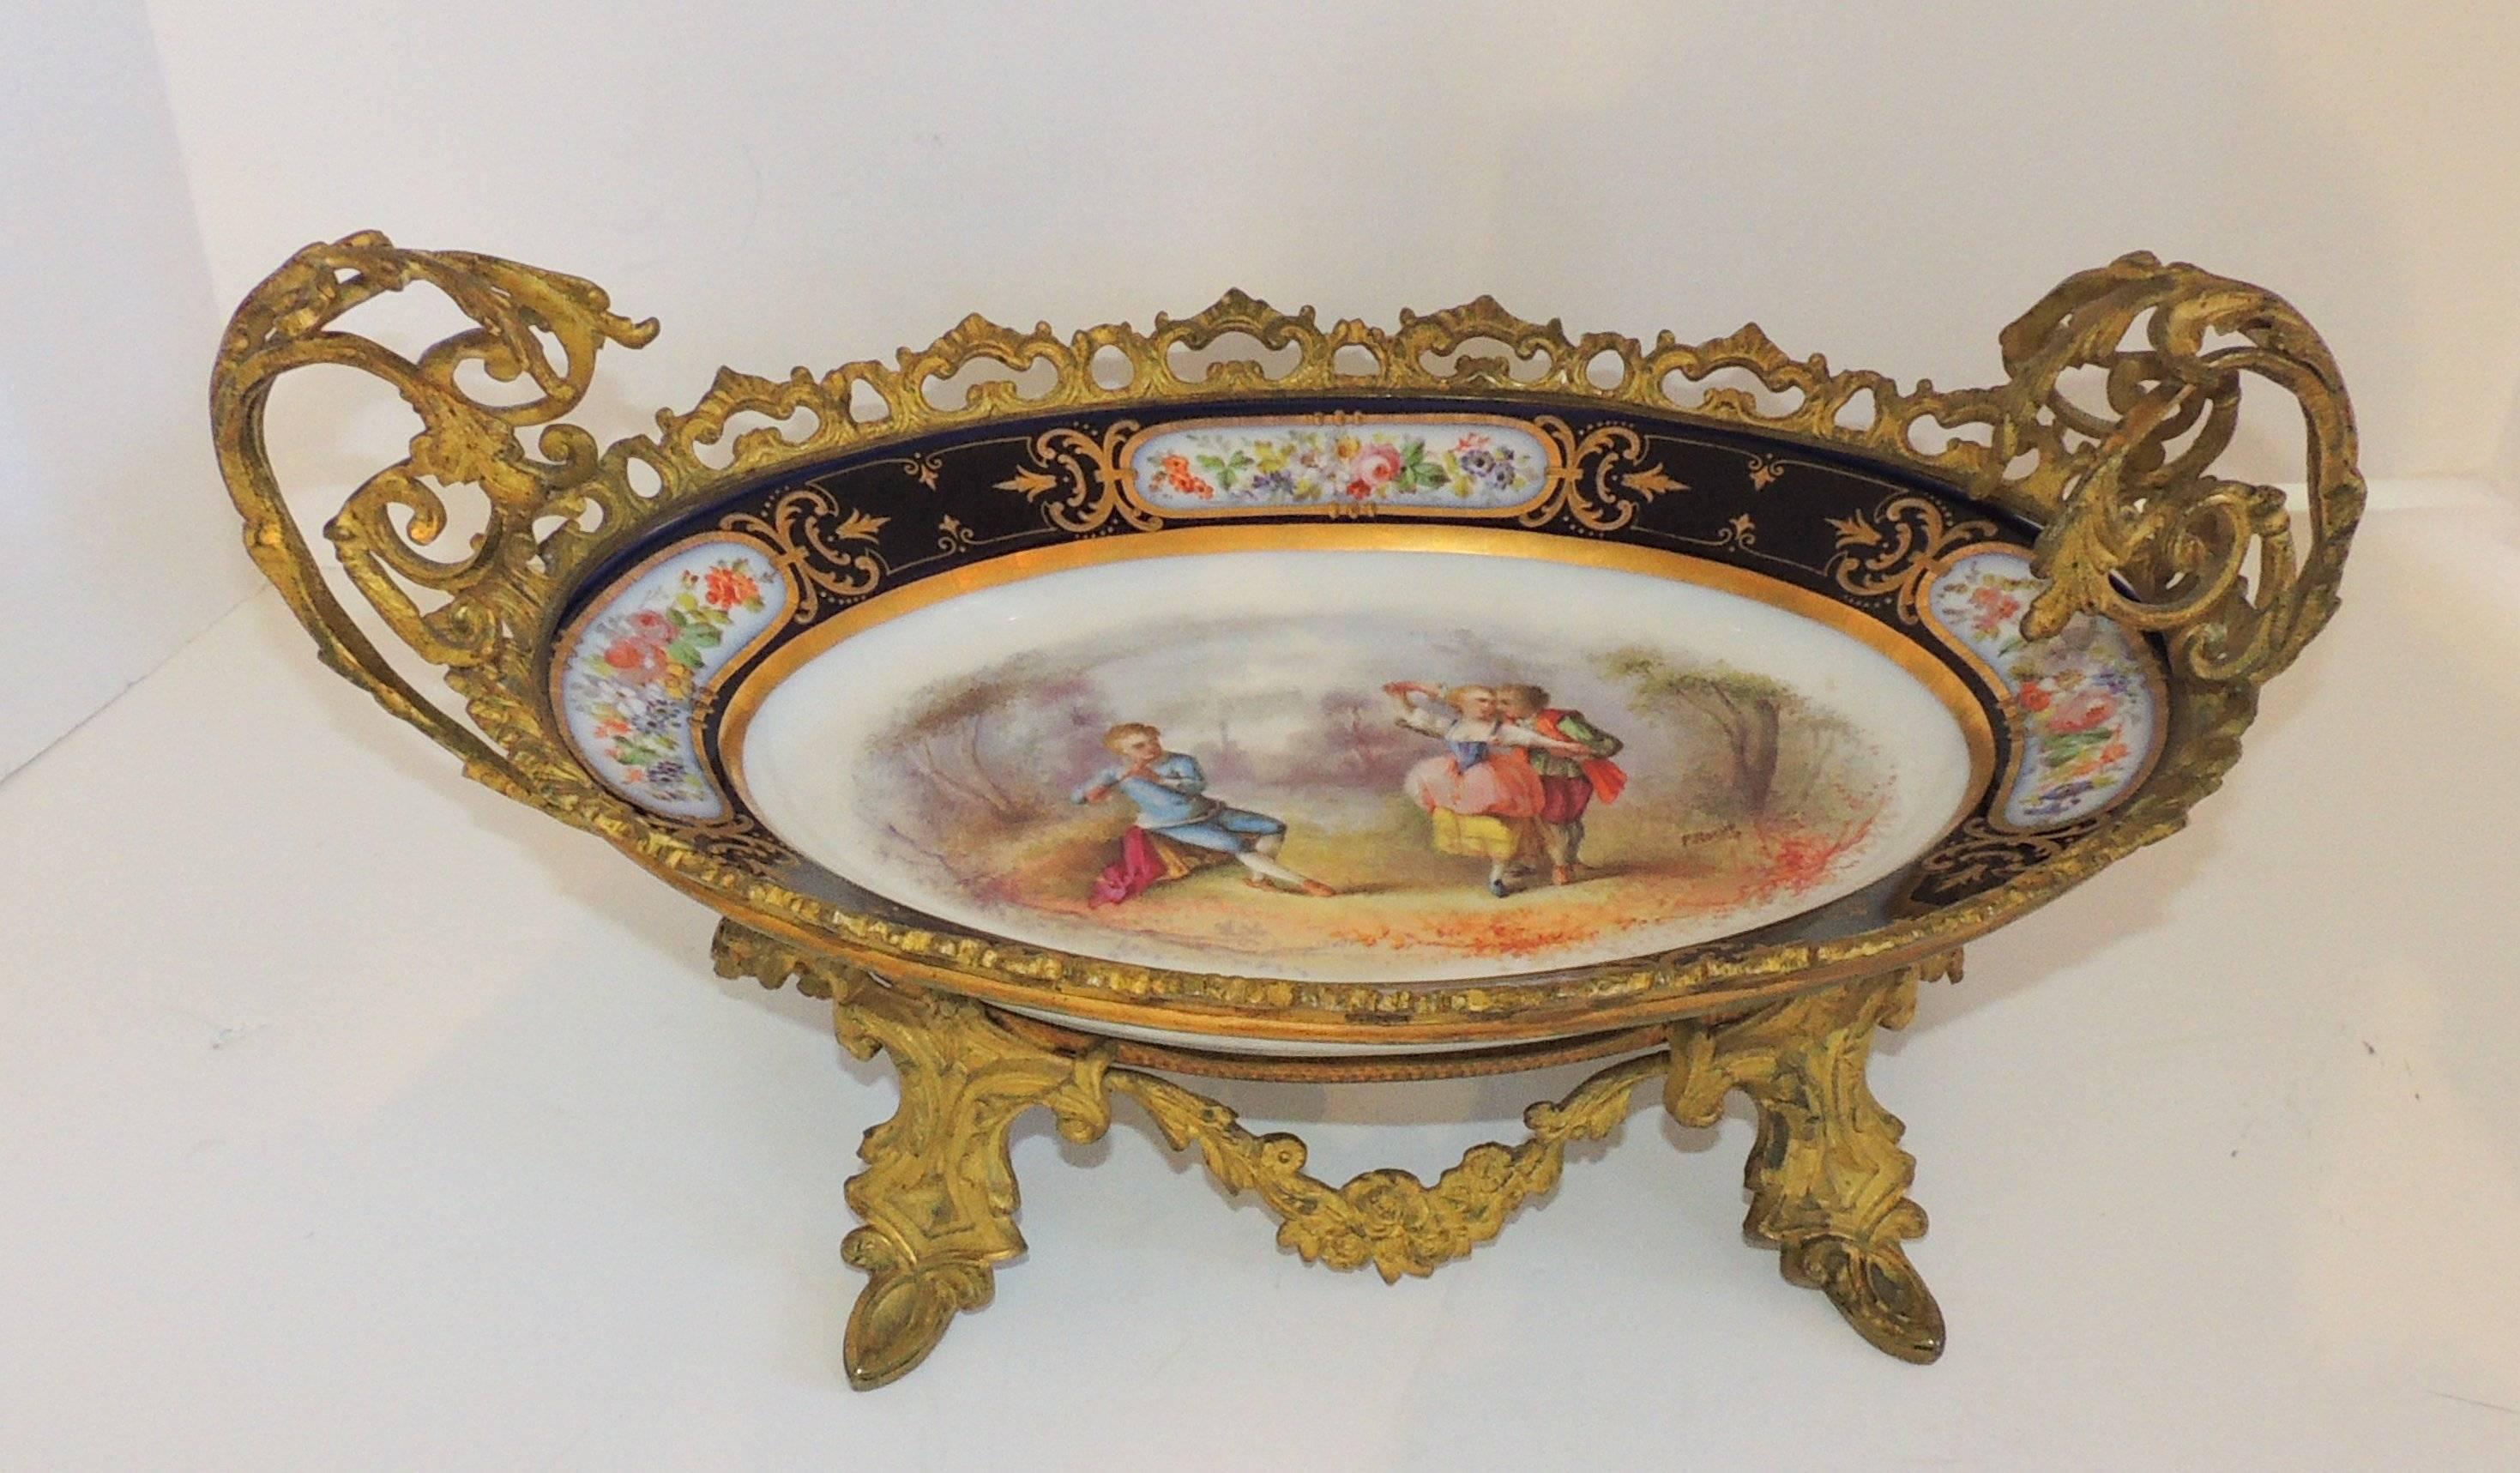 Wonderful French Ormolu Bronze Sevres Hand-Painted Porcelain Centerpiece Tray For Sale 1